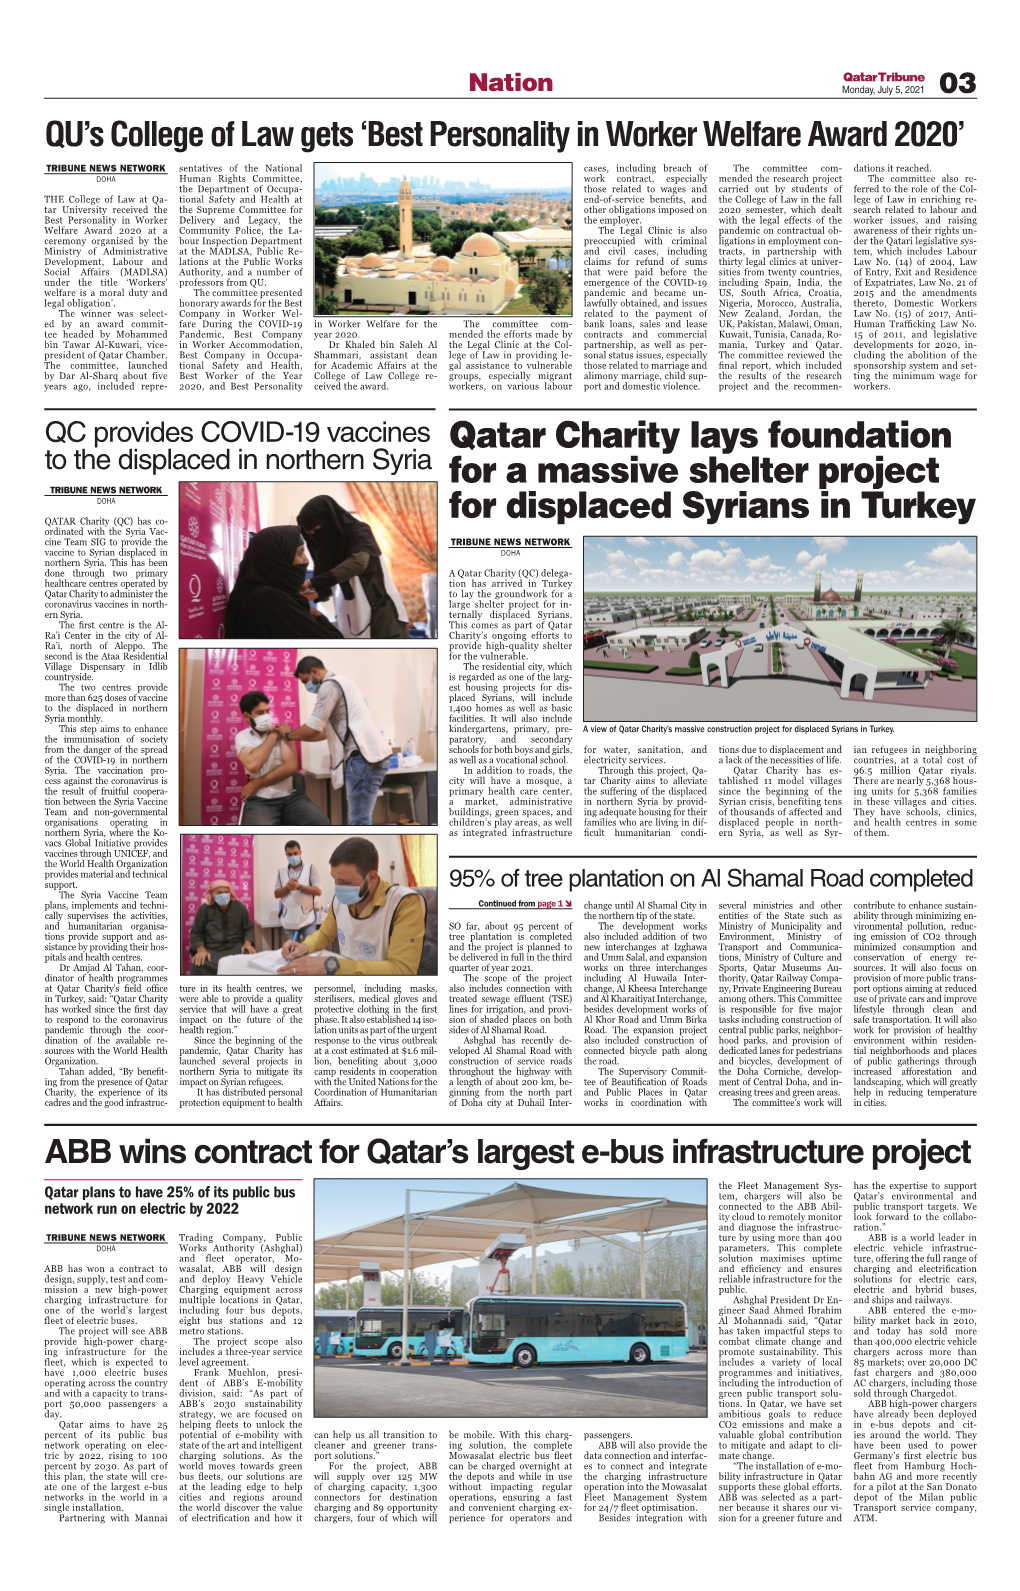 Qatar Charity Lays Foundation for a Massive Shelter Project For